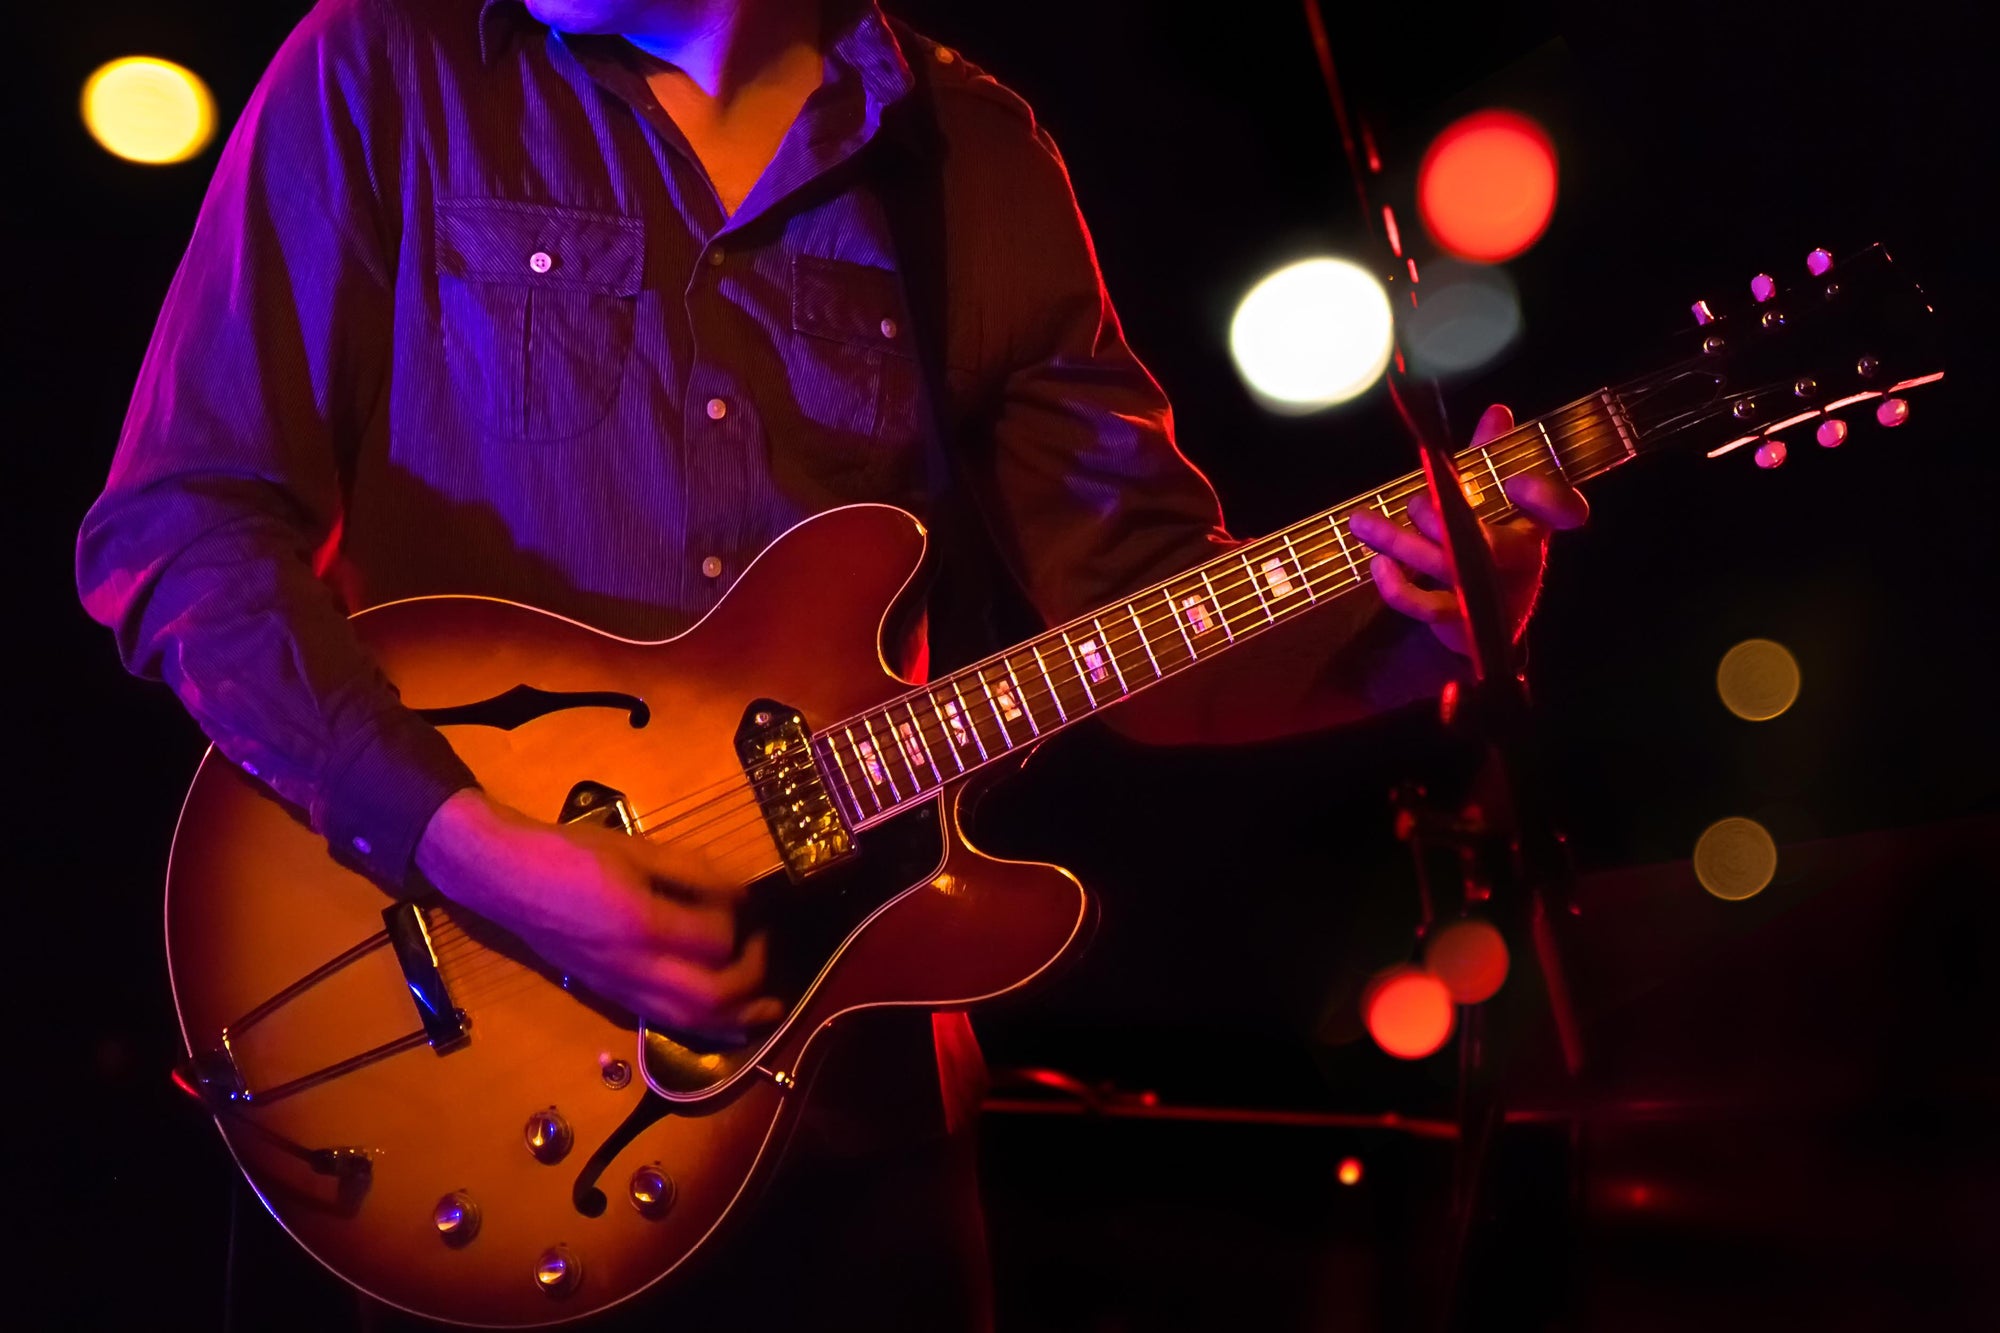 The Top 5 Things Every Live Guitarist Should Know